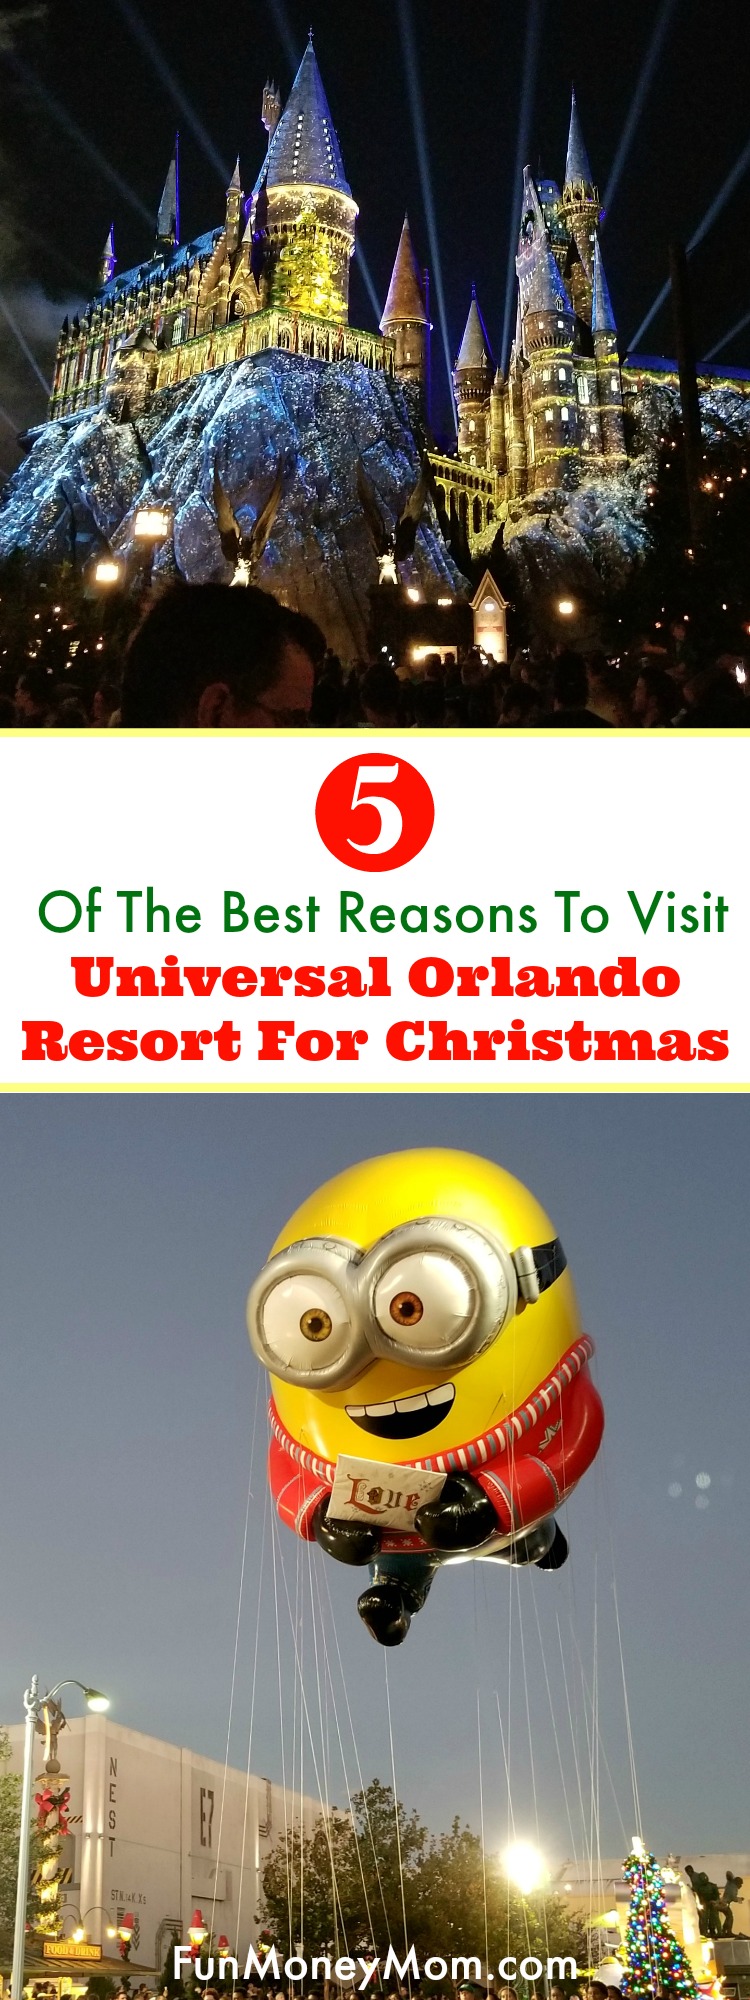 Looking for a fun holiday vacation? Here are five great reasons why you should book that family vacation and celebrate Christmas at Universal Orlando Resort.